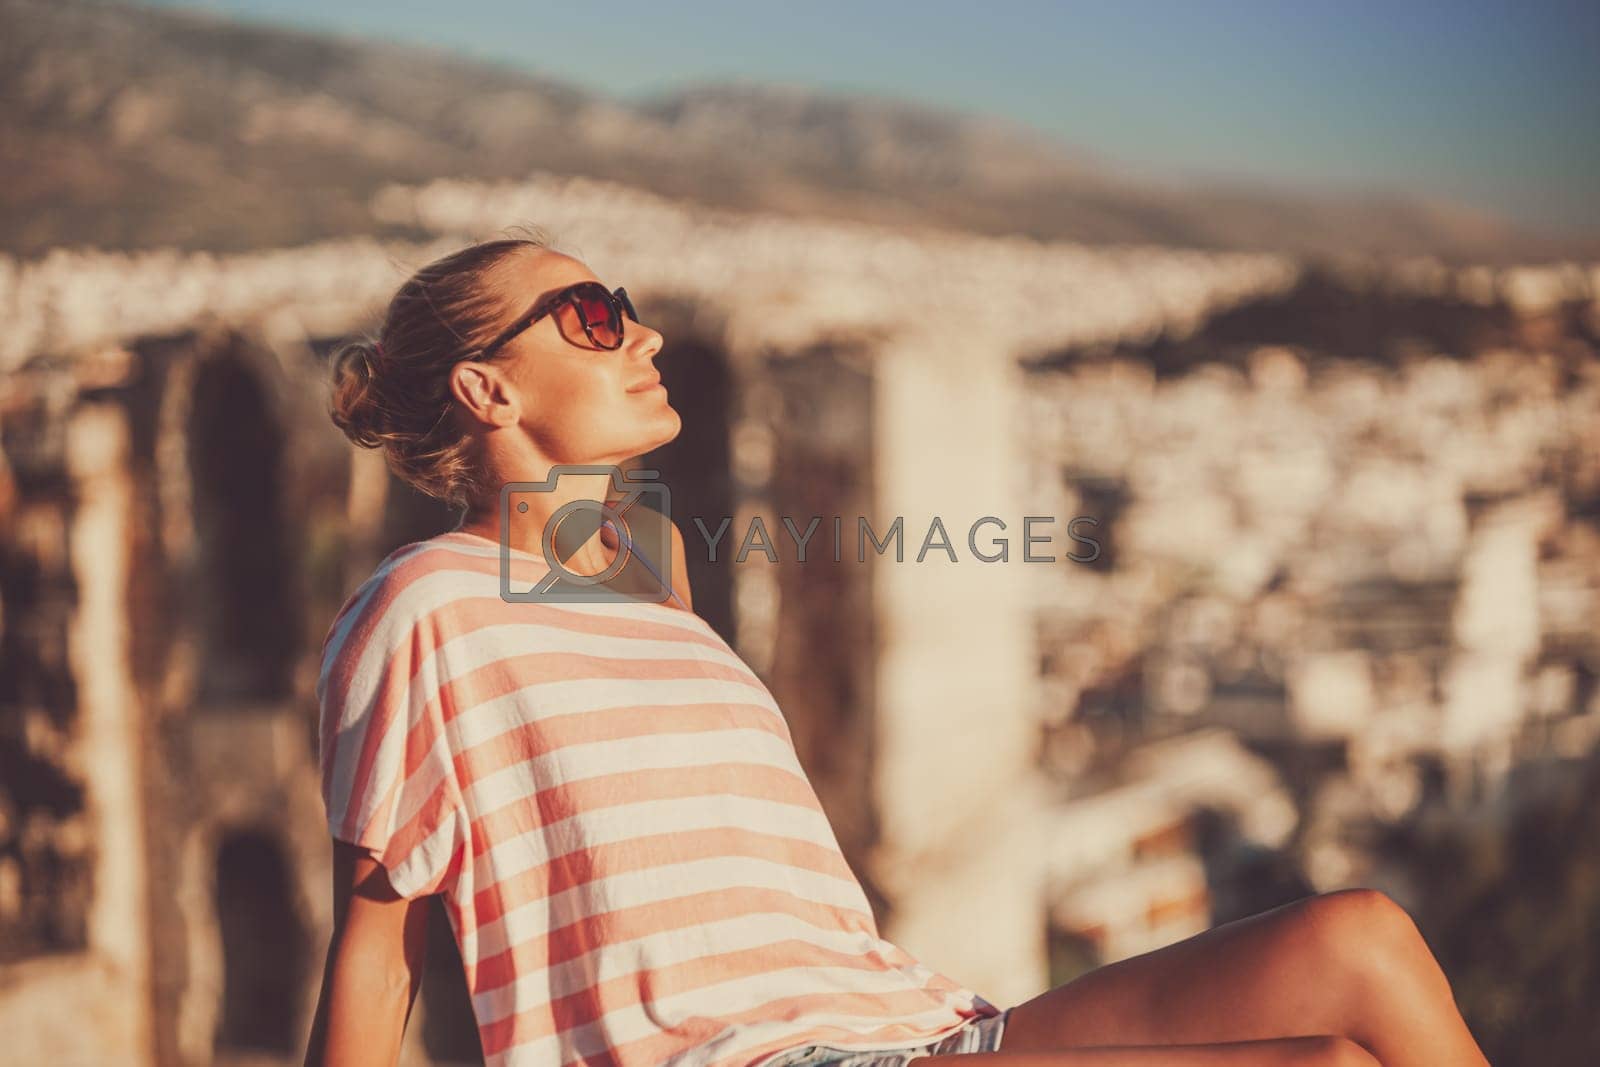 Royalty free image of Beautiful Woman in Greece summer vacation by Anna_Omelchenko